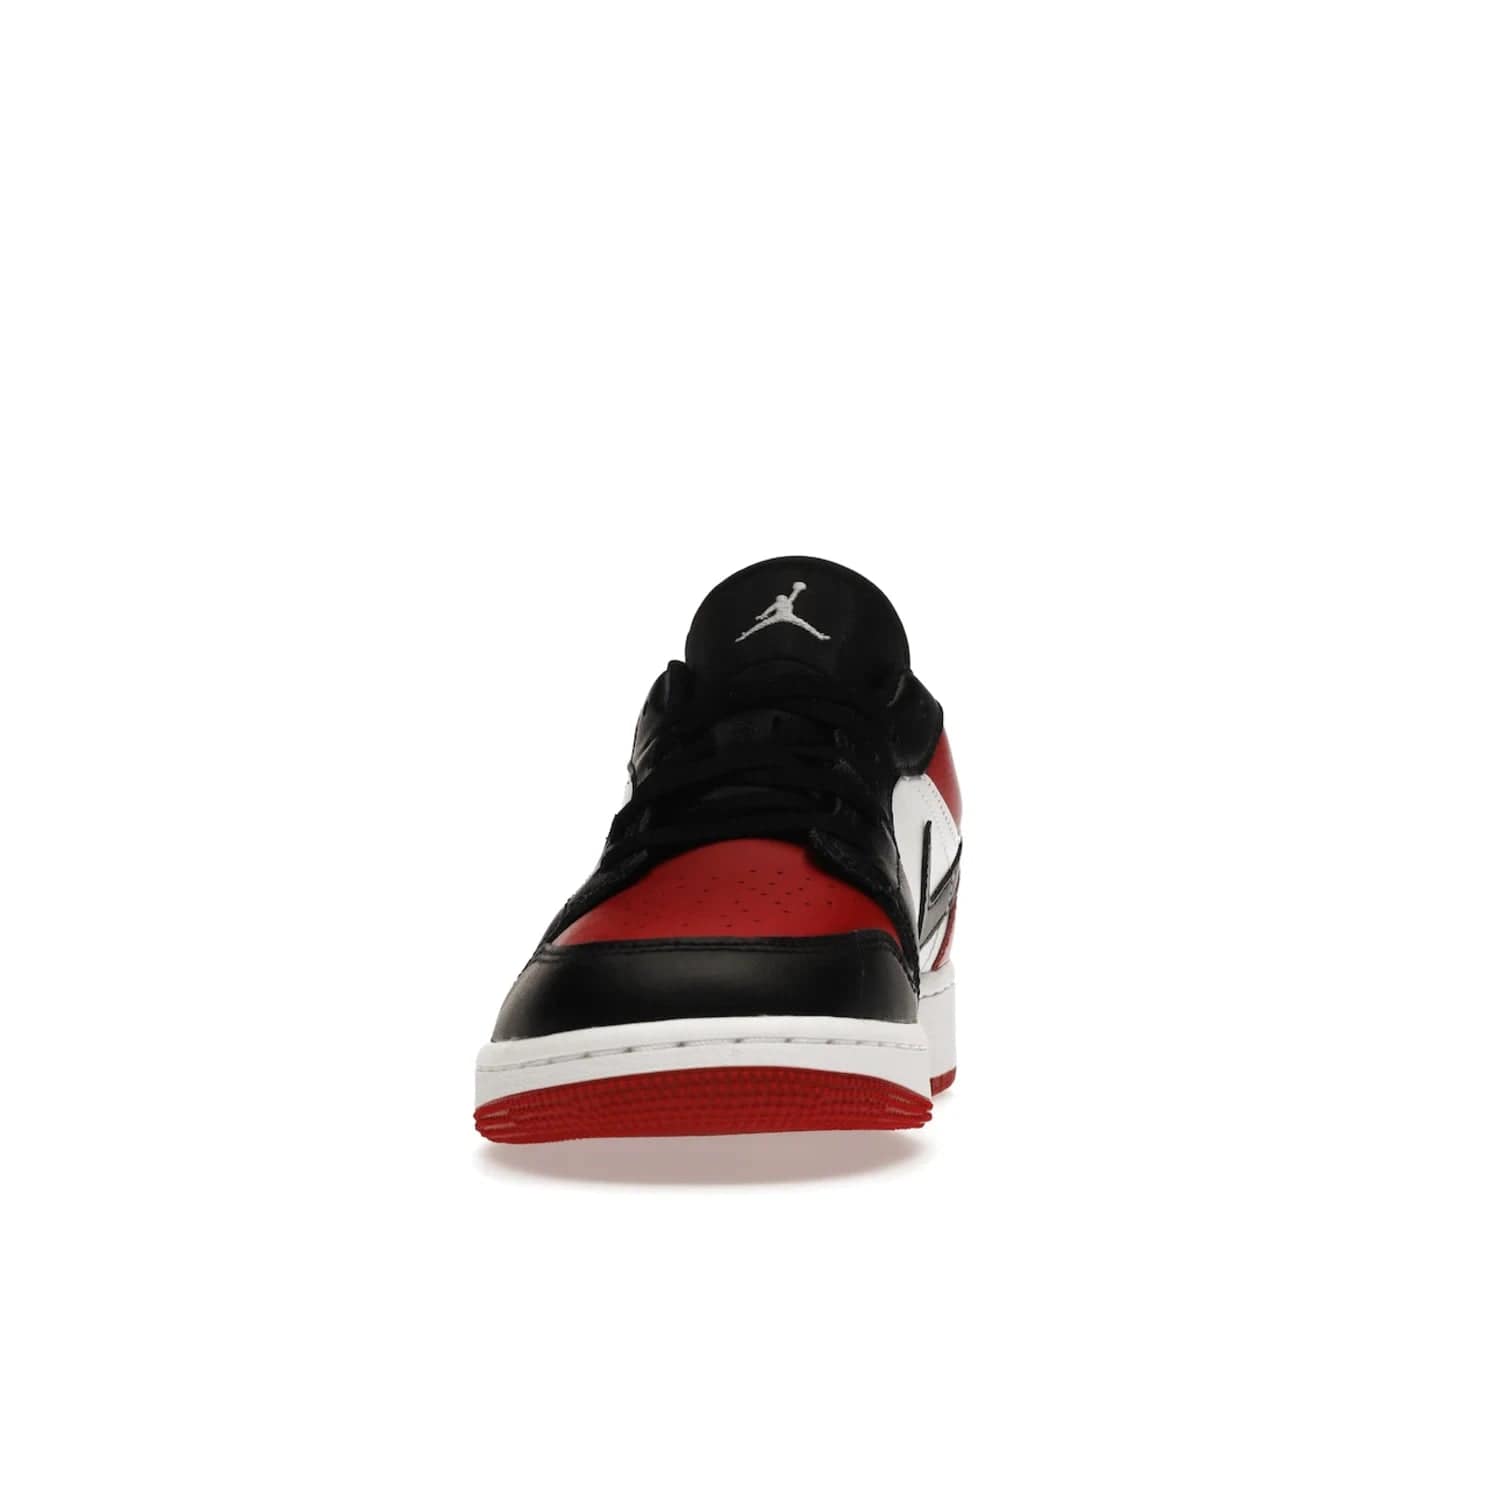 Jordan 1 Low Bred Toe (GS) - Image 11 - Only at www.BallersClubKickz.com - #
Iconic sneaker from Jordan brand with classic colorway, unique detailing & Air Jordan Wings logo. Step into the shoes of the greats with the Jordan 1 Low Bred Toe GS!